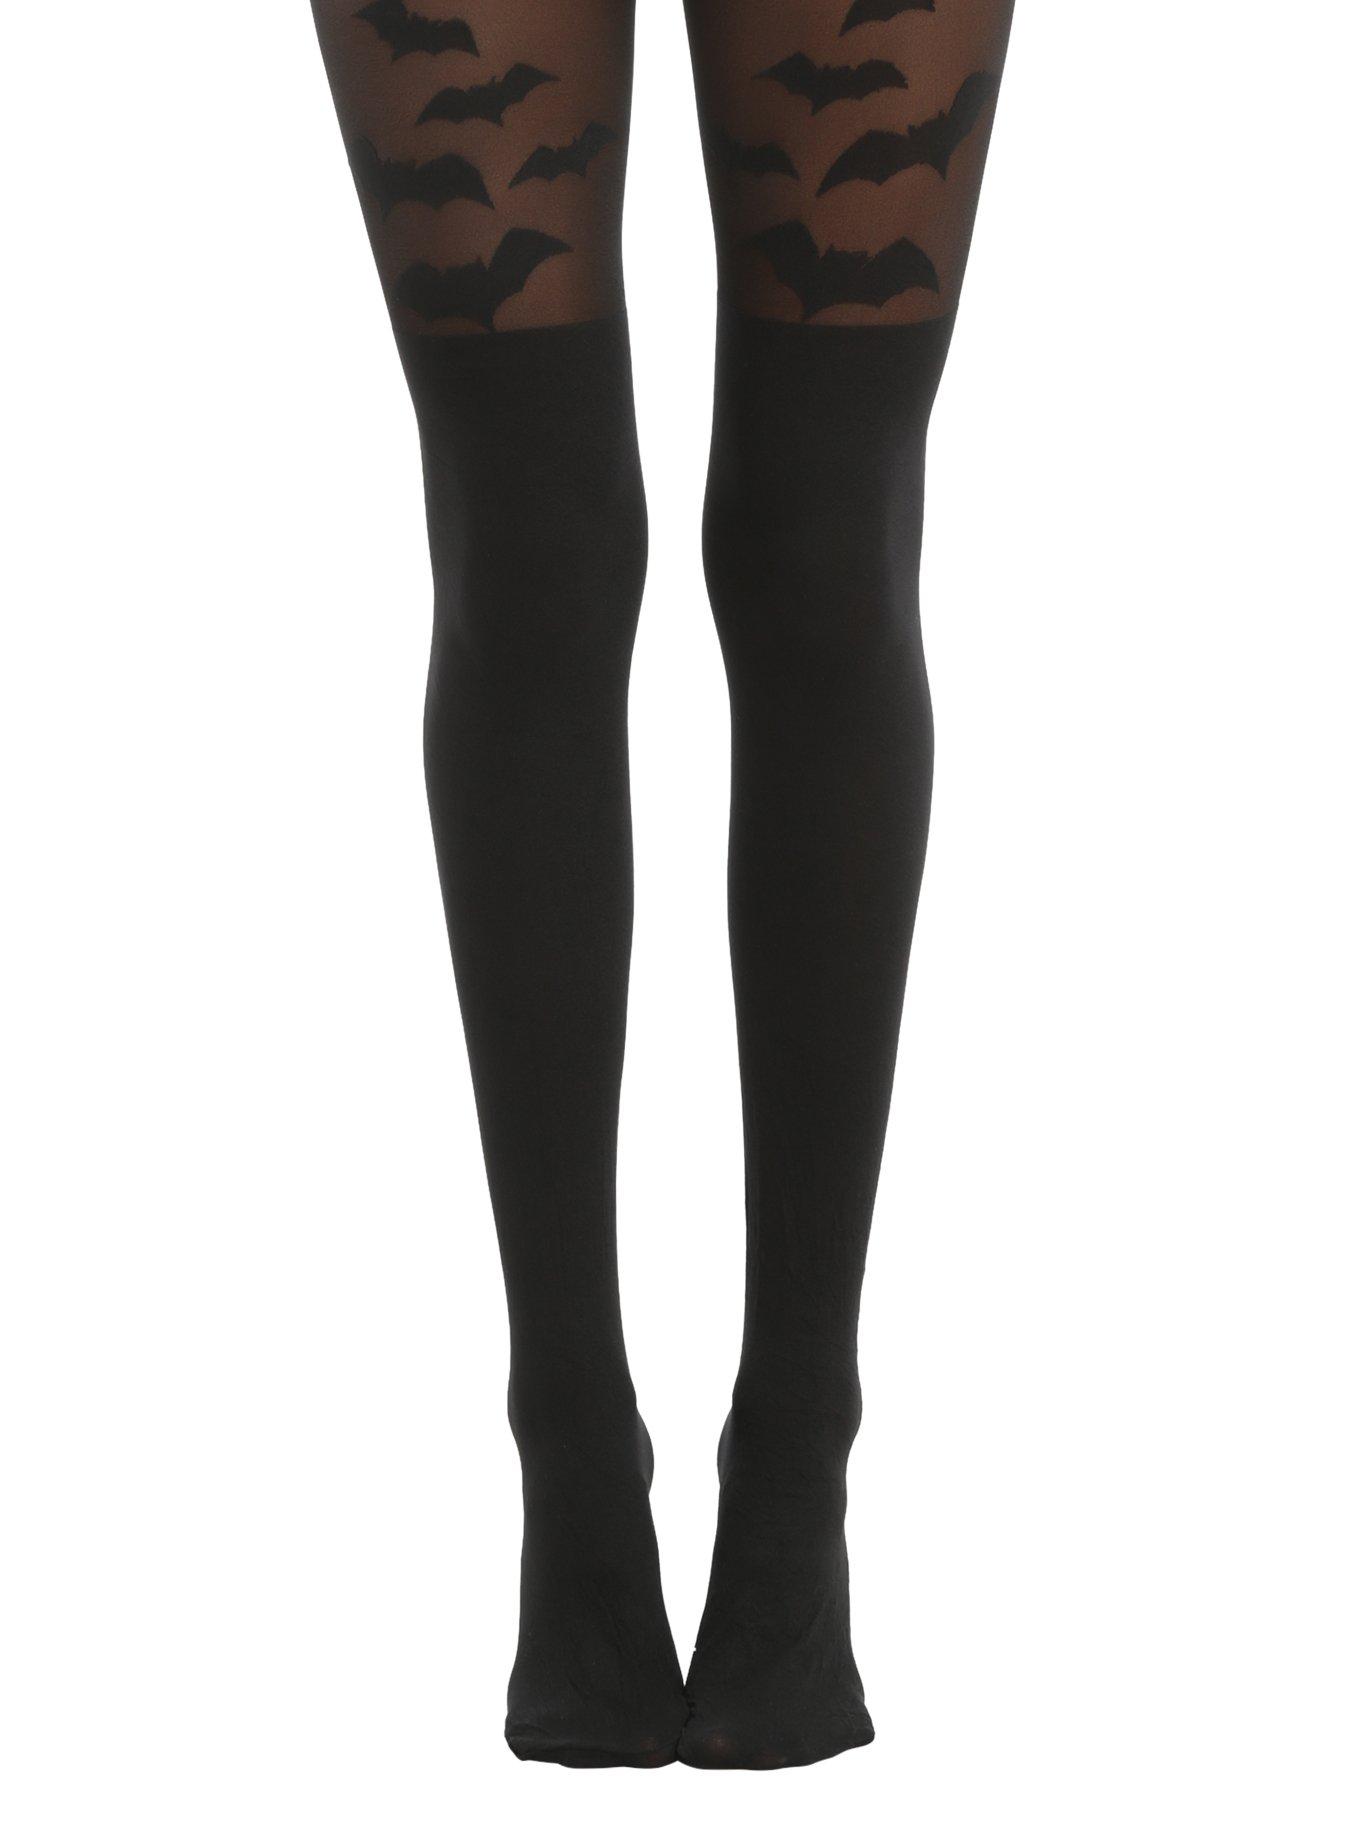 Hot Topic Hello Kitty Faux Thigh High Tights